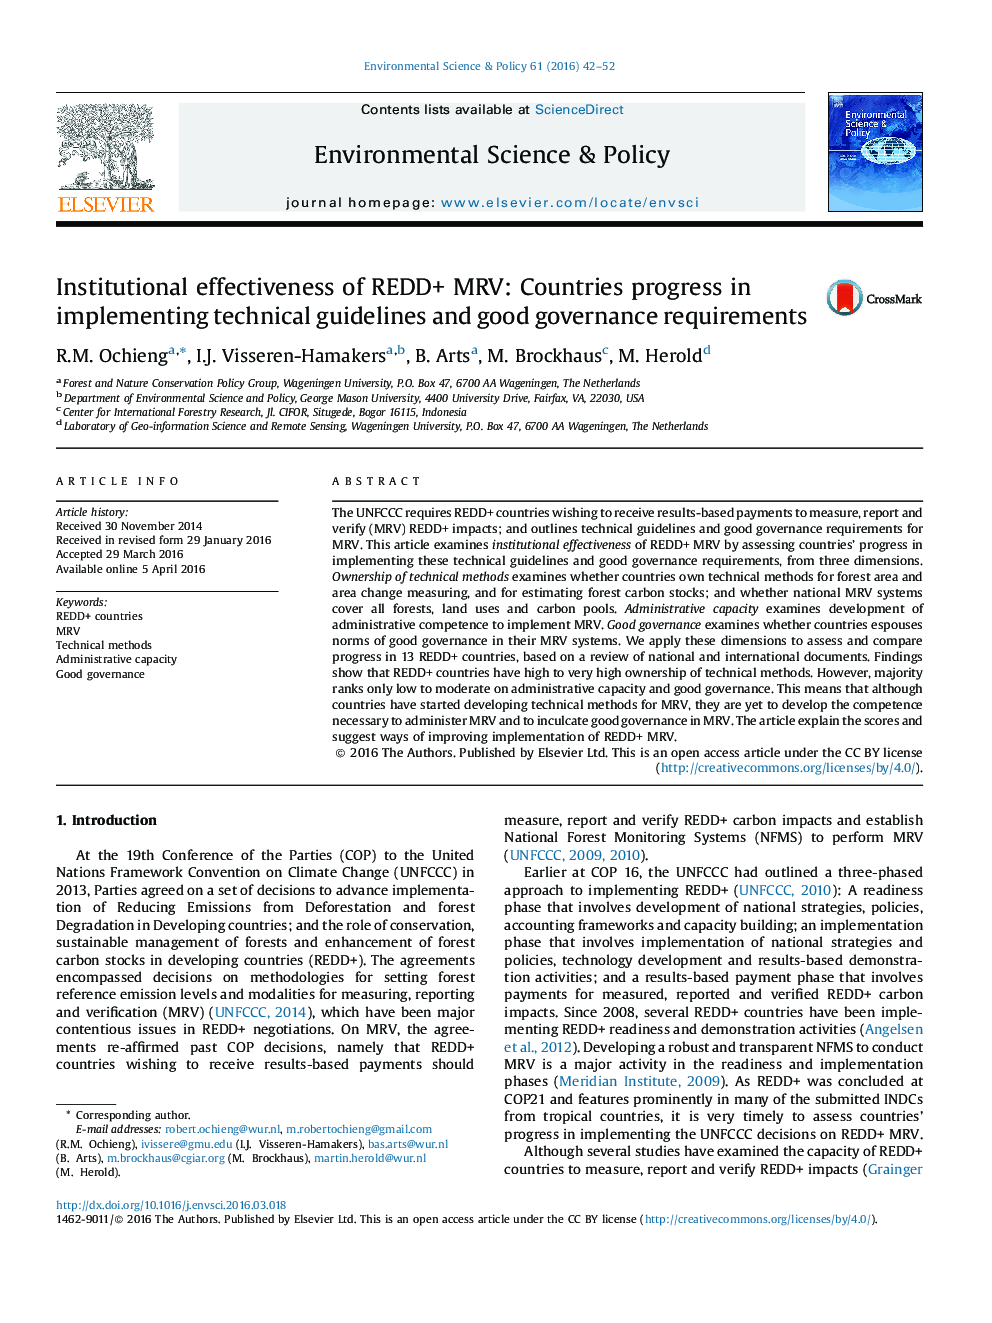 Institutional effectiveness of REDD+ MRV: Countries progress in implementing technical guidelines and good governance requirements